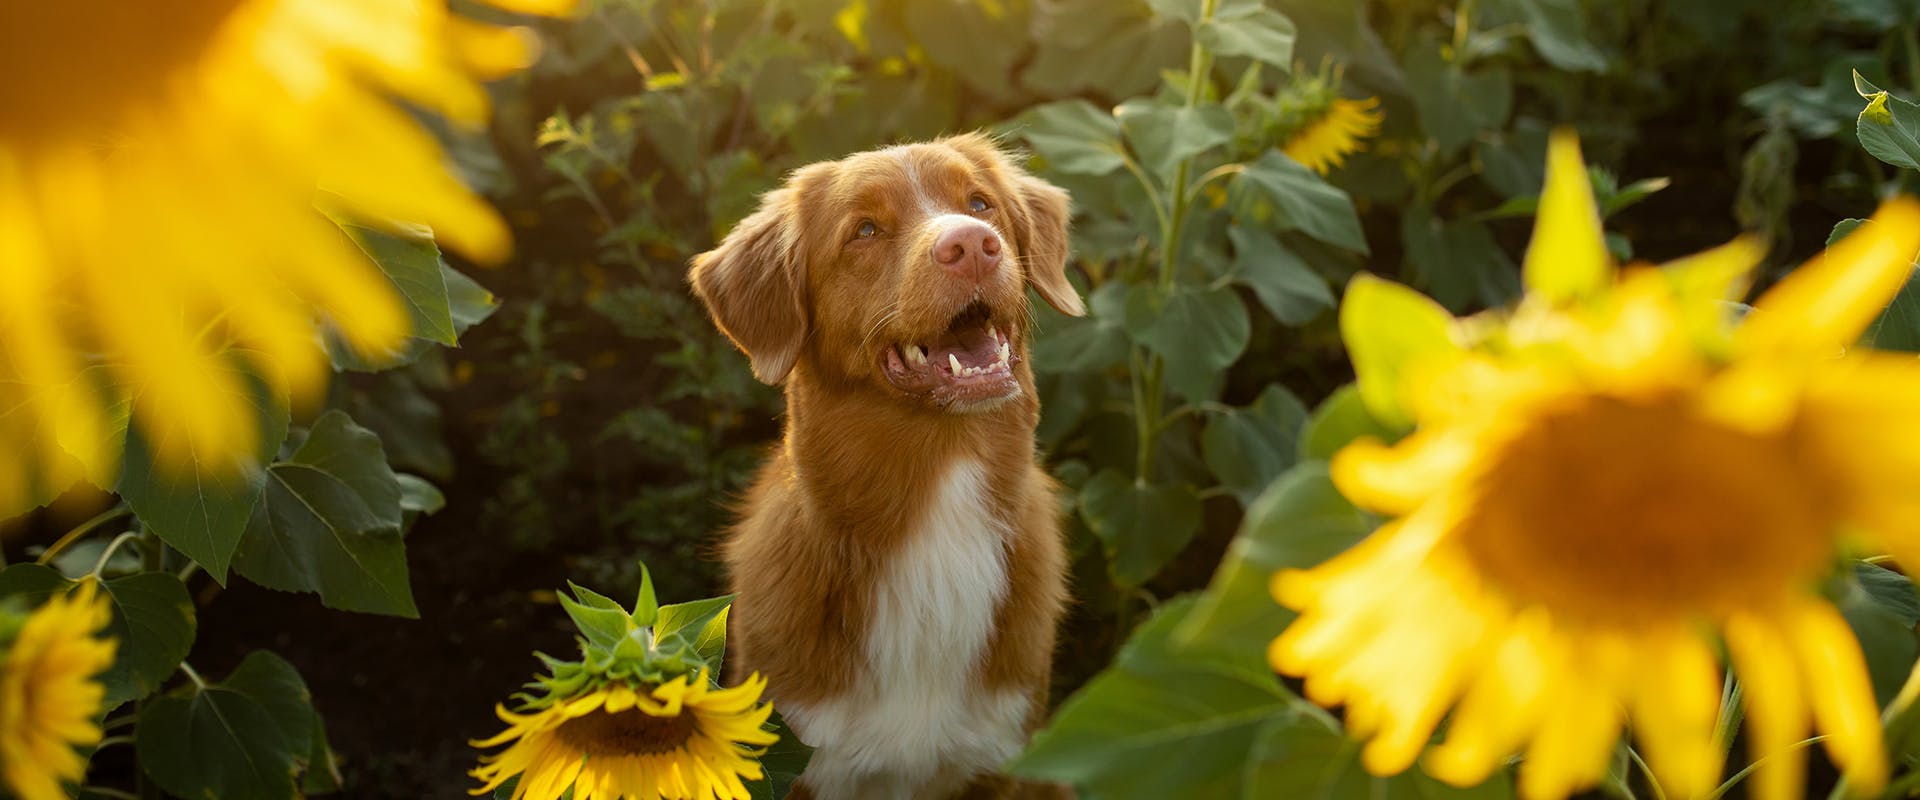 A dog sitting in a field of sunflowers